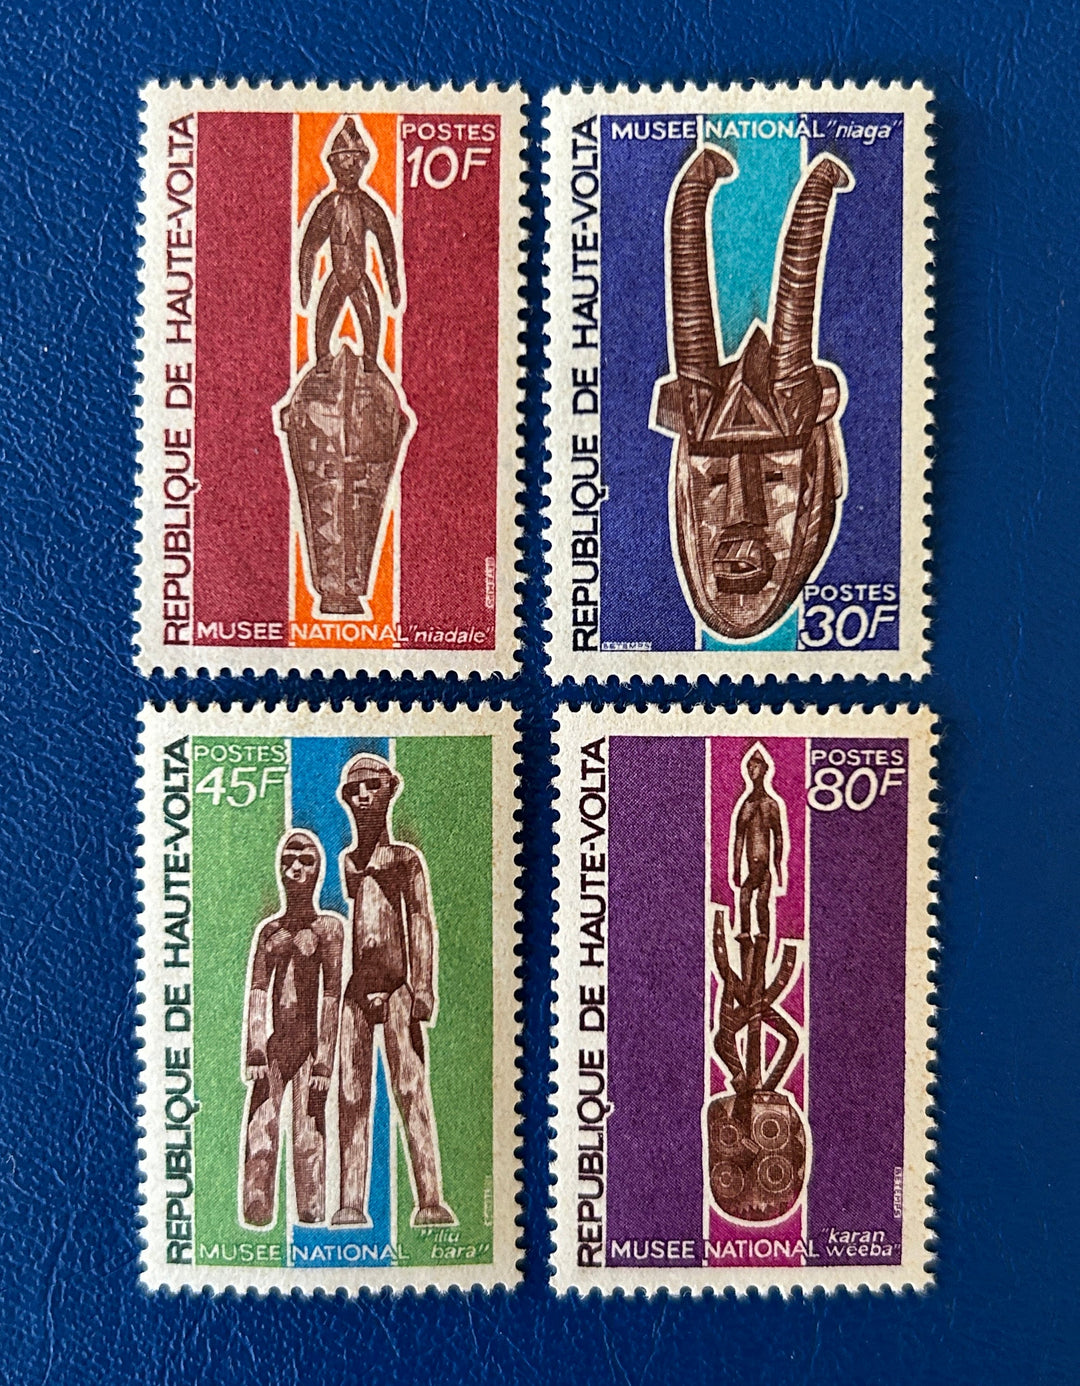 Upper Volta - Original Vintage Postage Stamps- 1970 - Ouagadougou National Museum - for the collector, artist or crafter